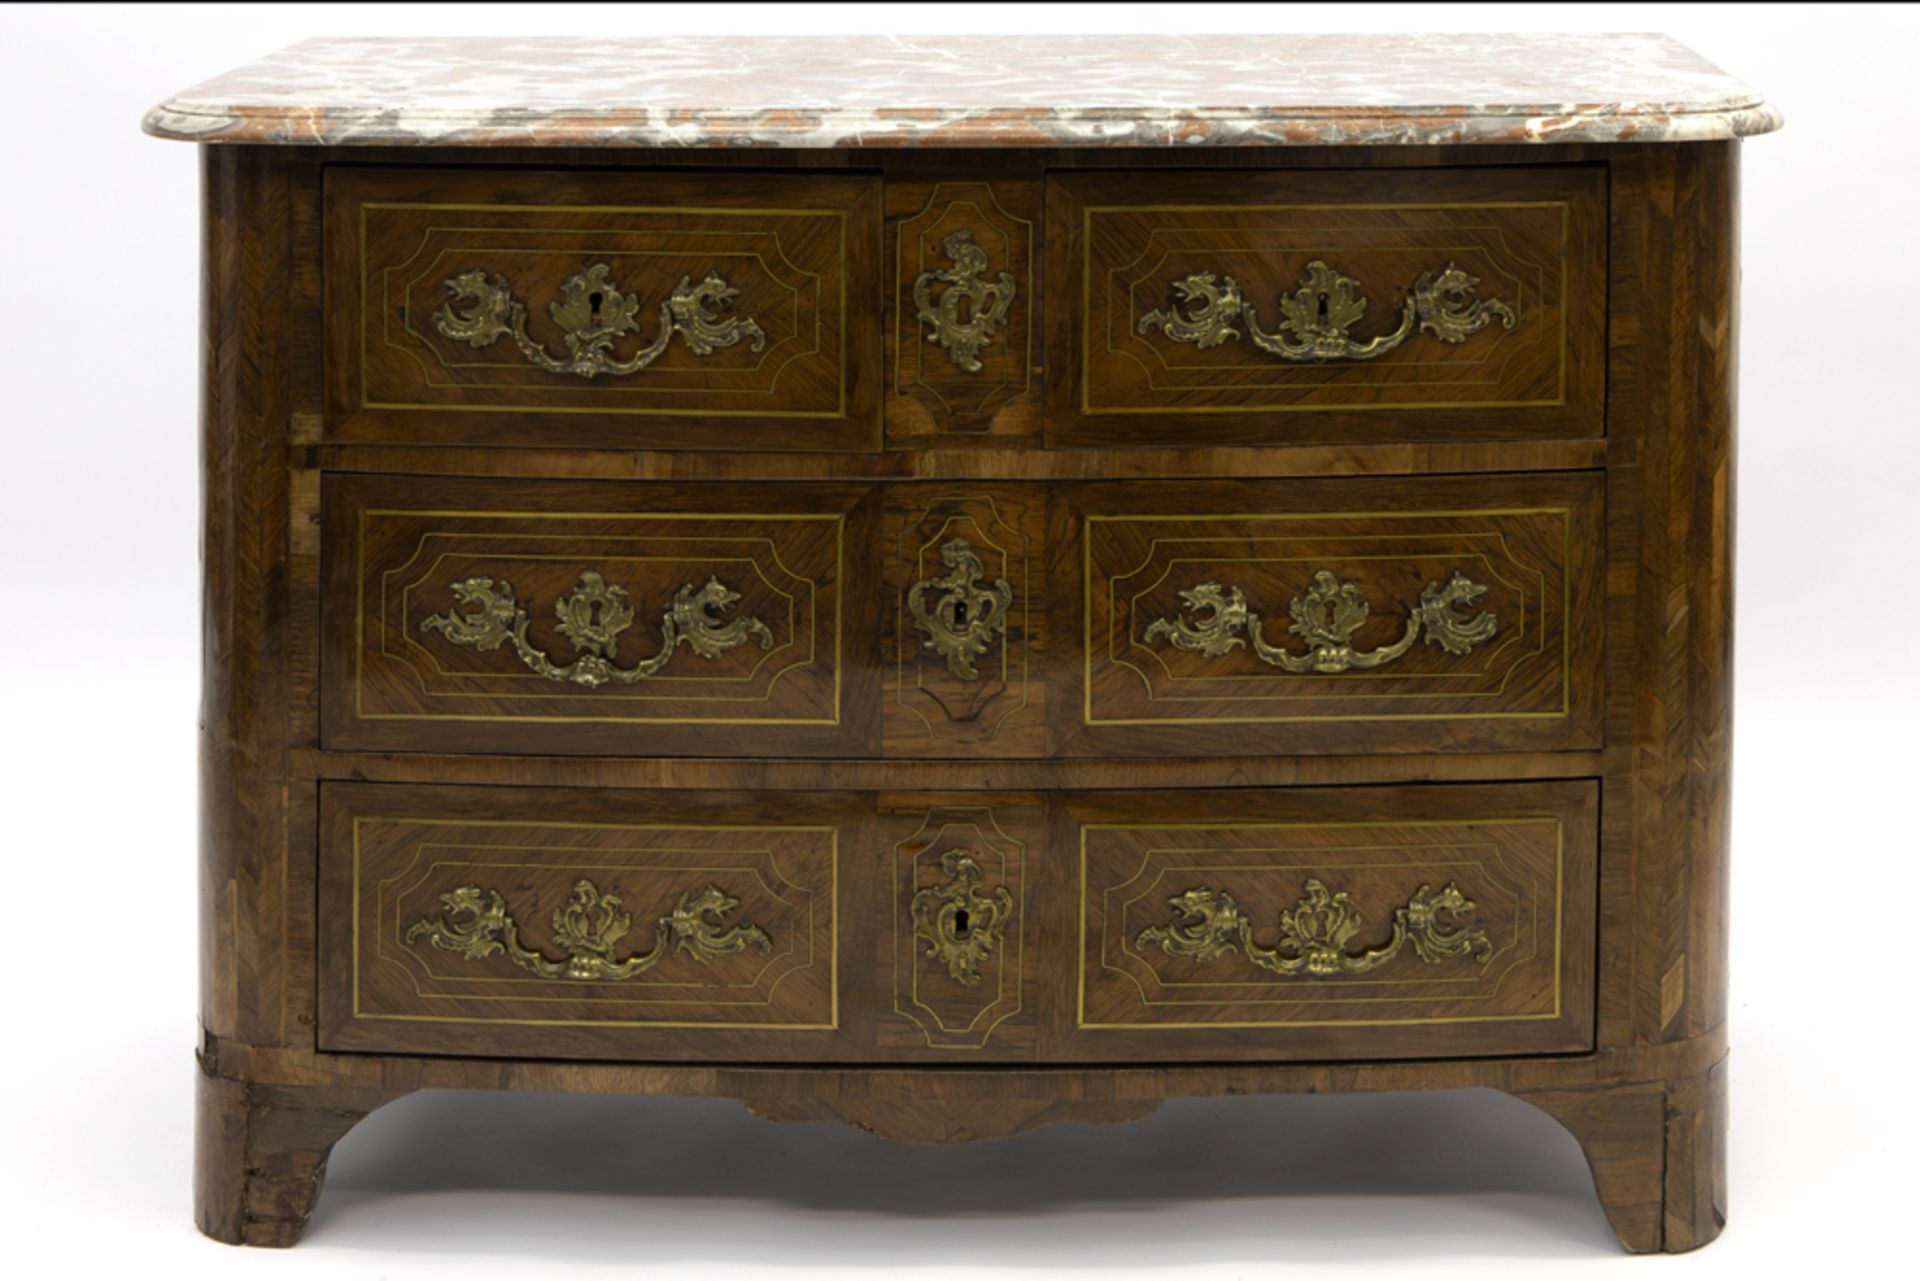 18th Cent. chest of drawers in parquetry with brass inlay, with four drawers with original mountings - Image 3 of 5